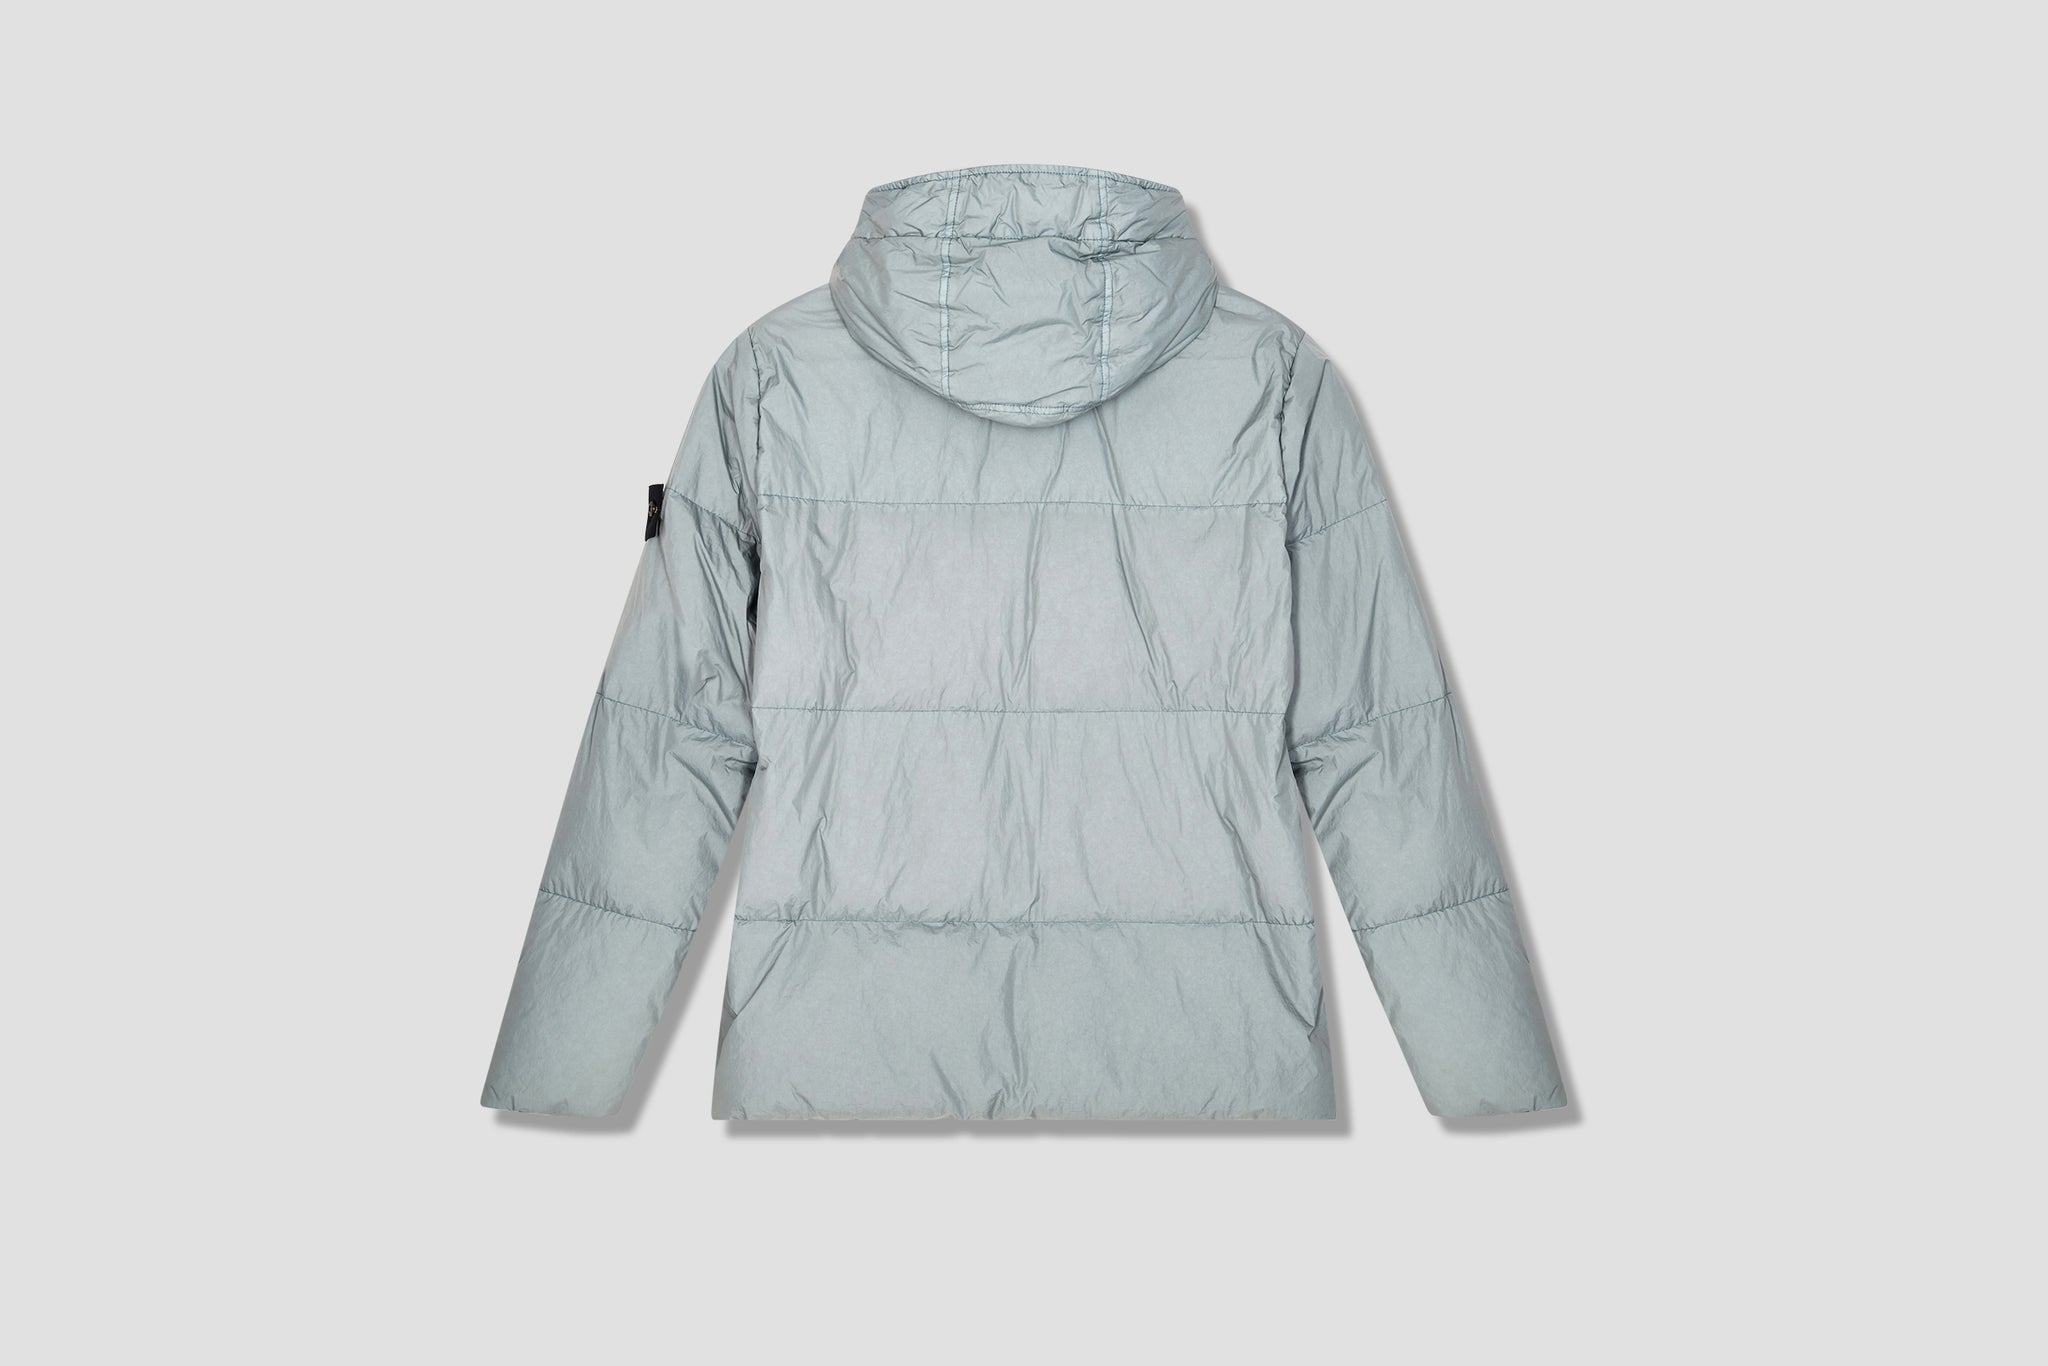 GARMENT DYED CRINKLE REPS NY WITH PRIMALOFT-TC GARMENT DYED 751540123 Grey